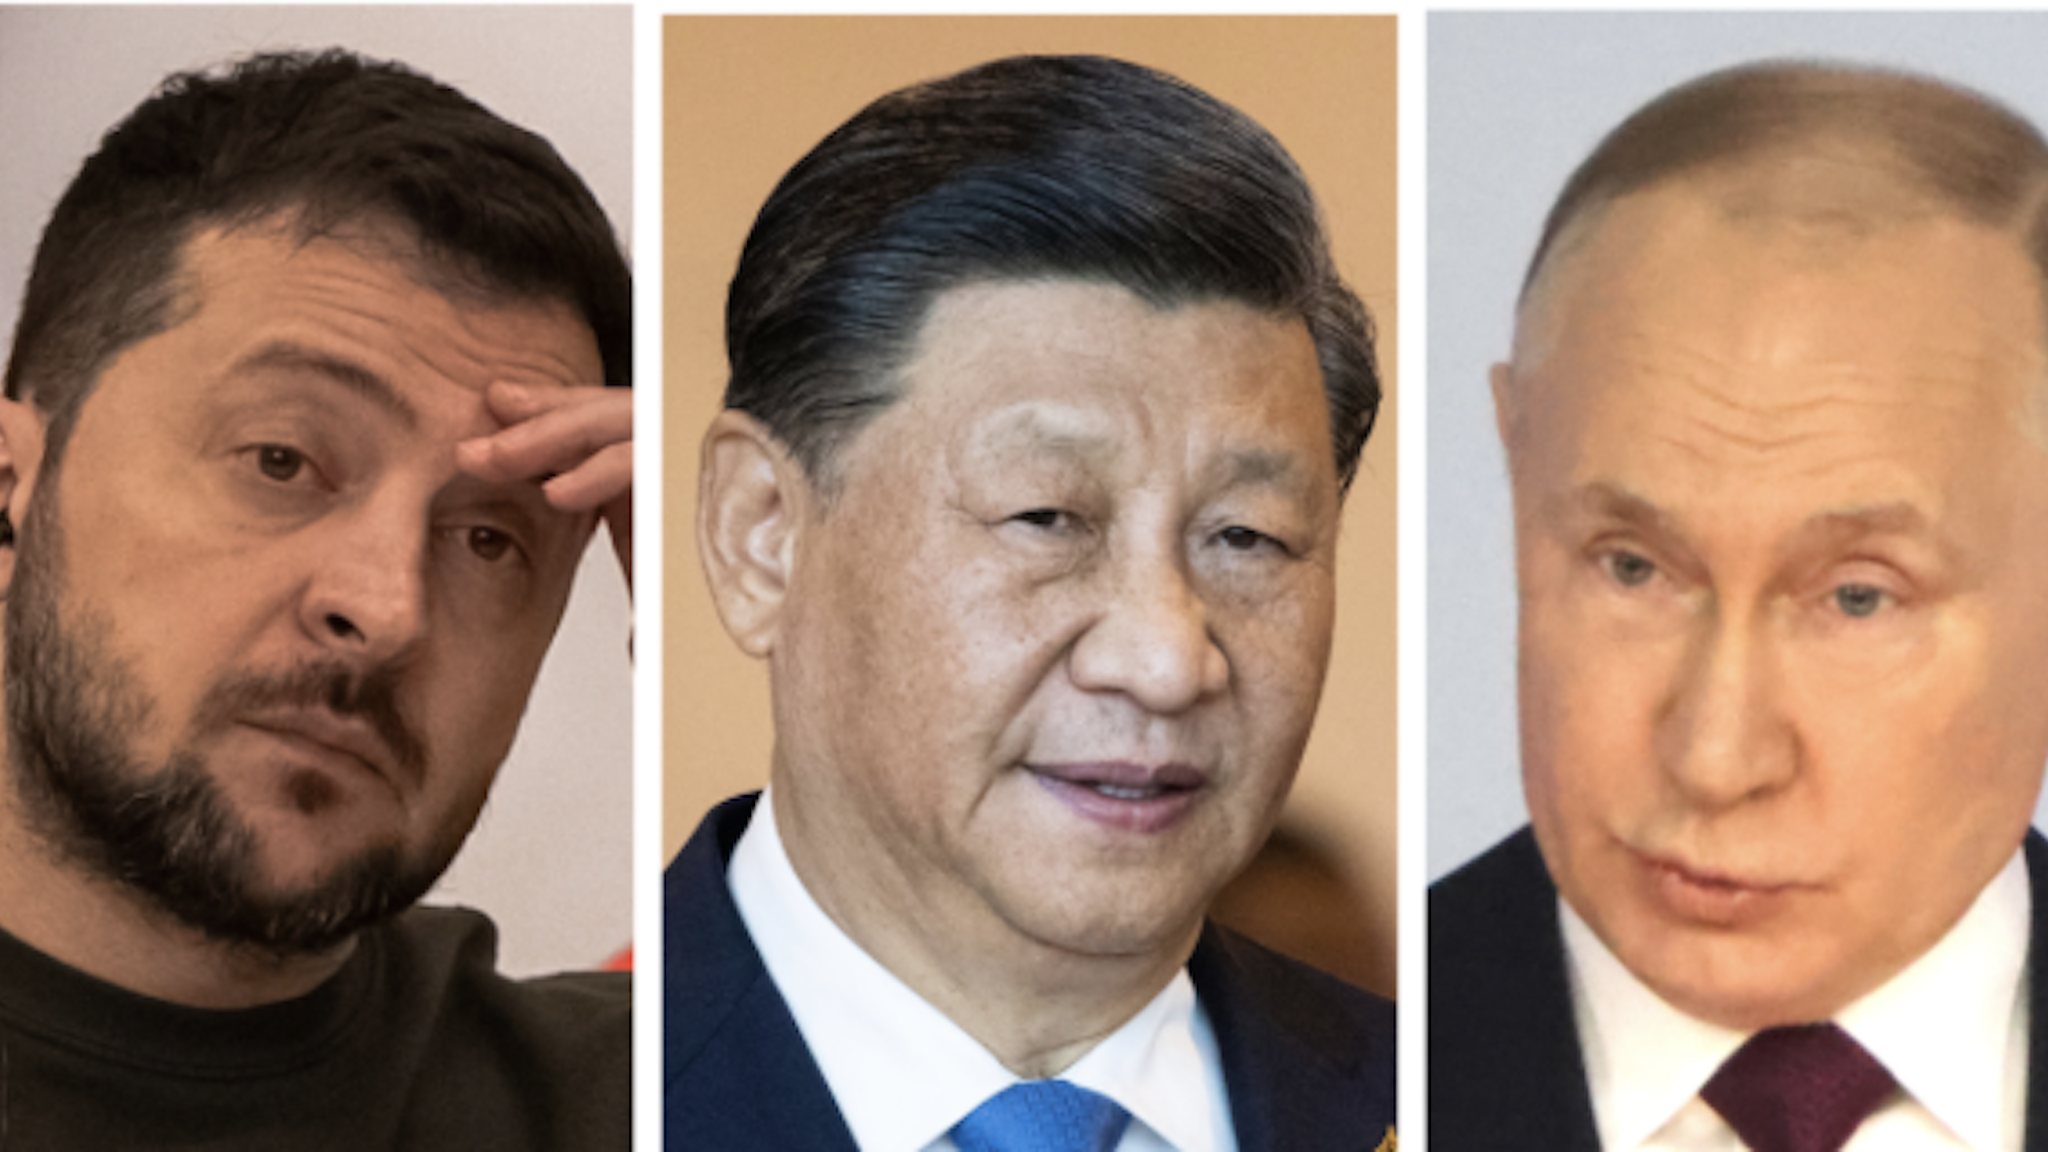 China put forward a plan for peace in Ukraine on the one-year anniversary of the embattle nation’s grueling war with Russia, but western leaders were initially cool to the proposal, which includes likely concessions to Moscow and a retreat by NATO.